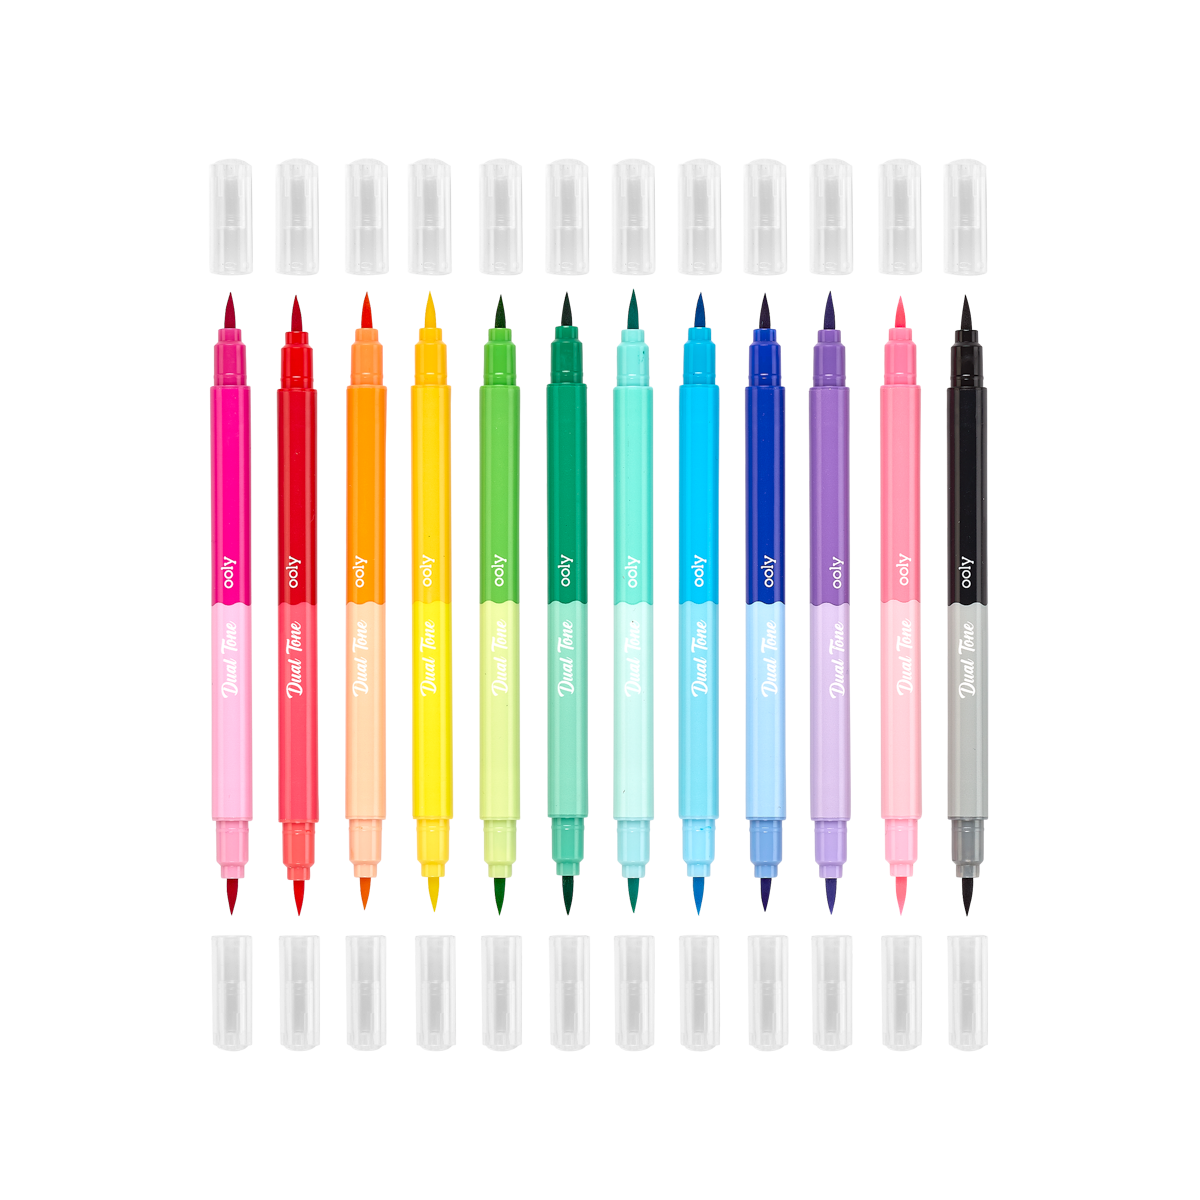 Double Rainbow Dual Tip Markers